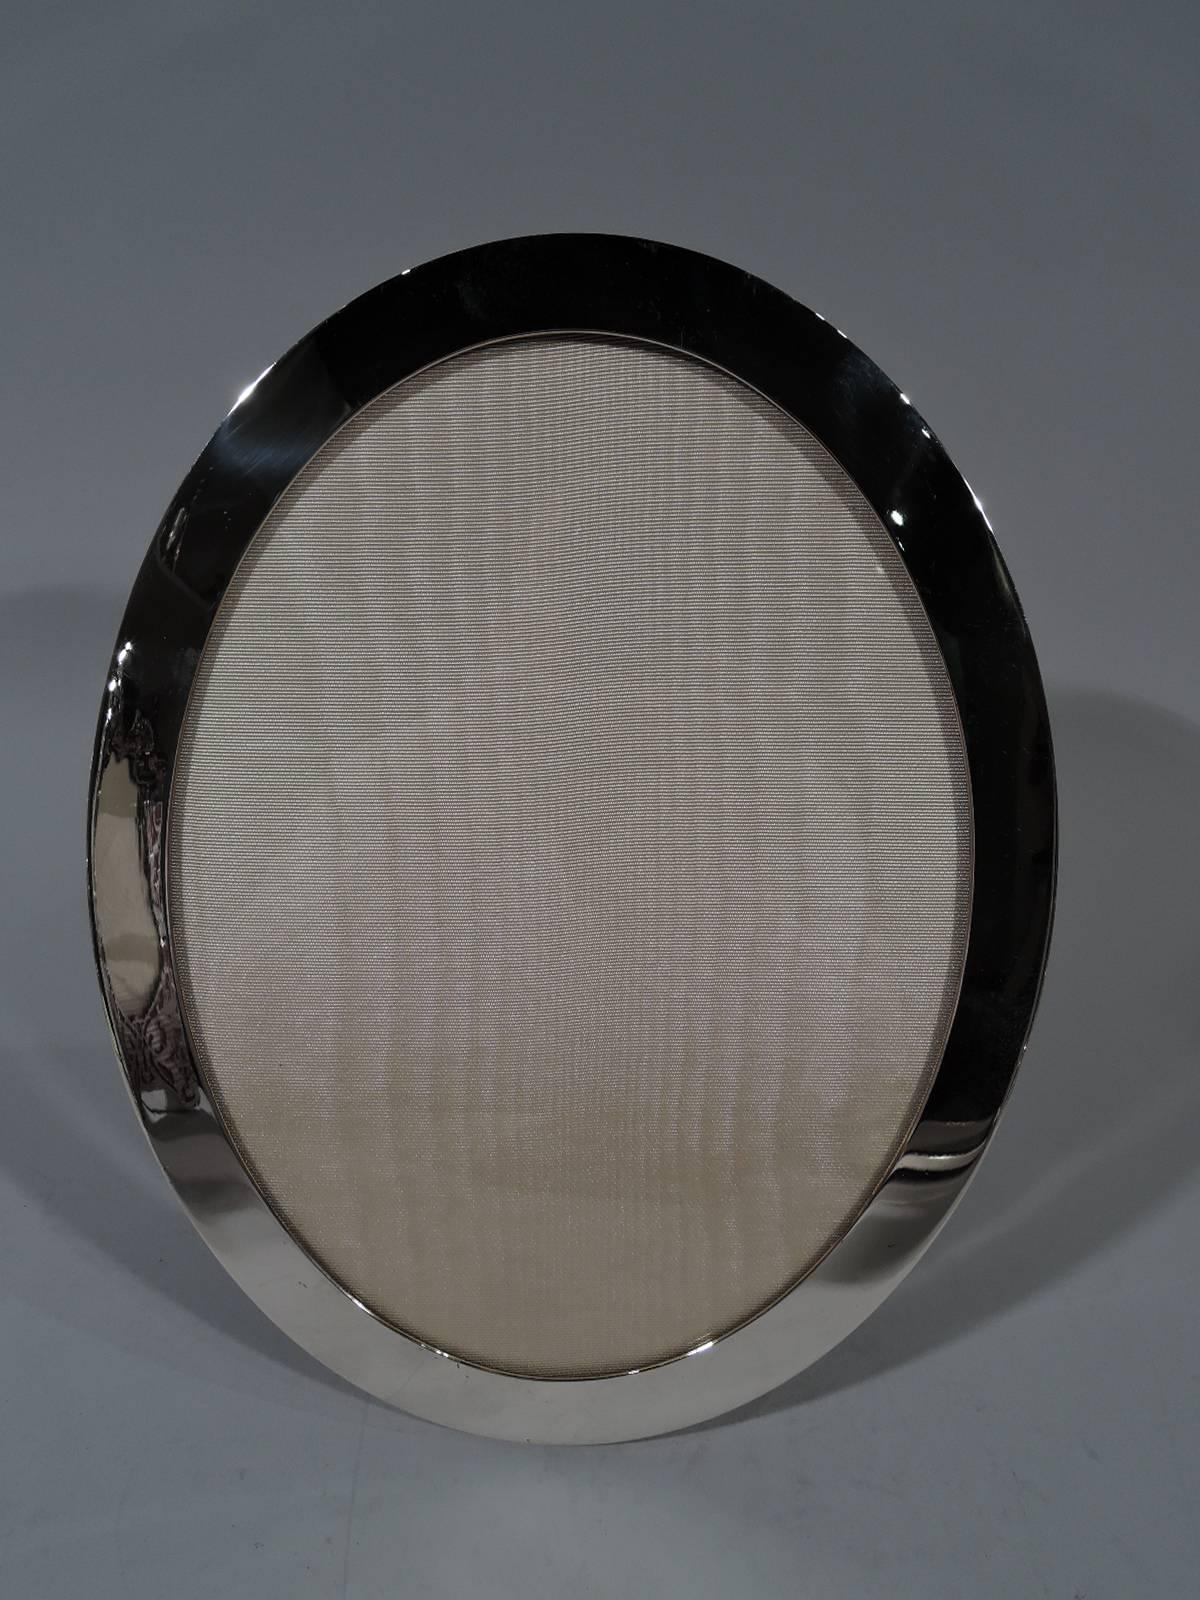 Modern sterling silver picture frame. Made by Tiffany & Co. in New York. Oval window with plain flat border. With glass, silk lining, and stained-wood back and hinged support. Hallmark includes postwar pattern no. 25033.

Dimensions: Frame: H 11 x